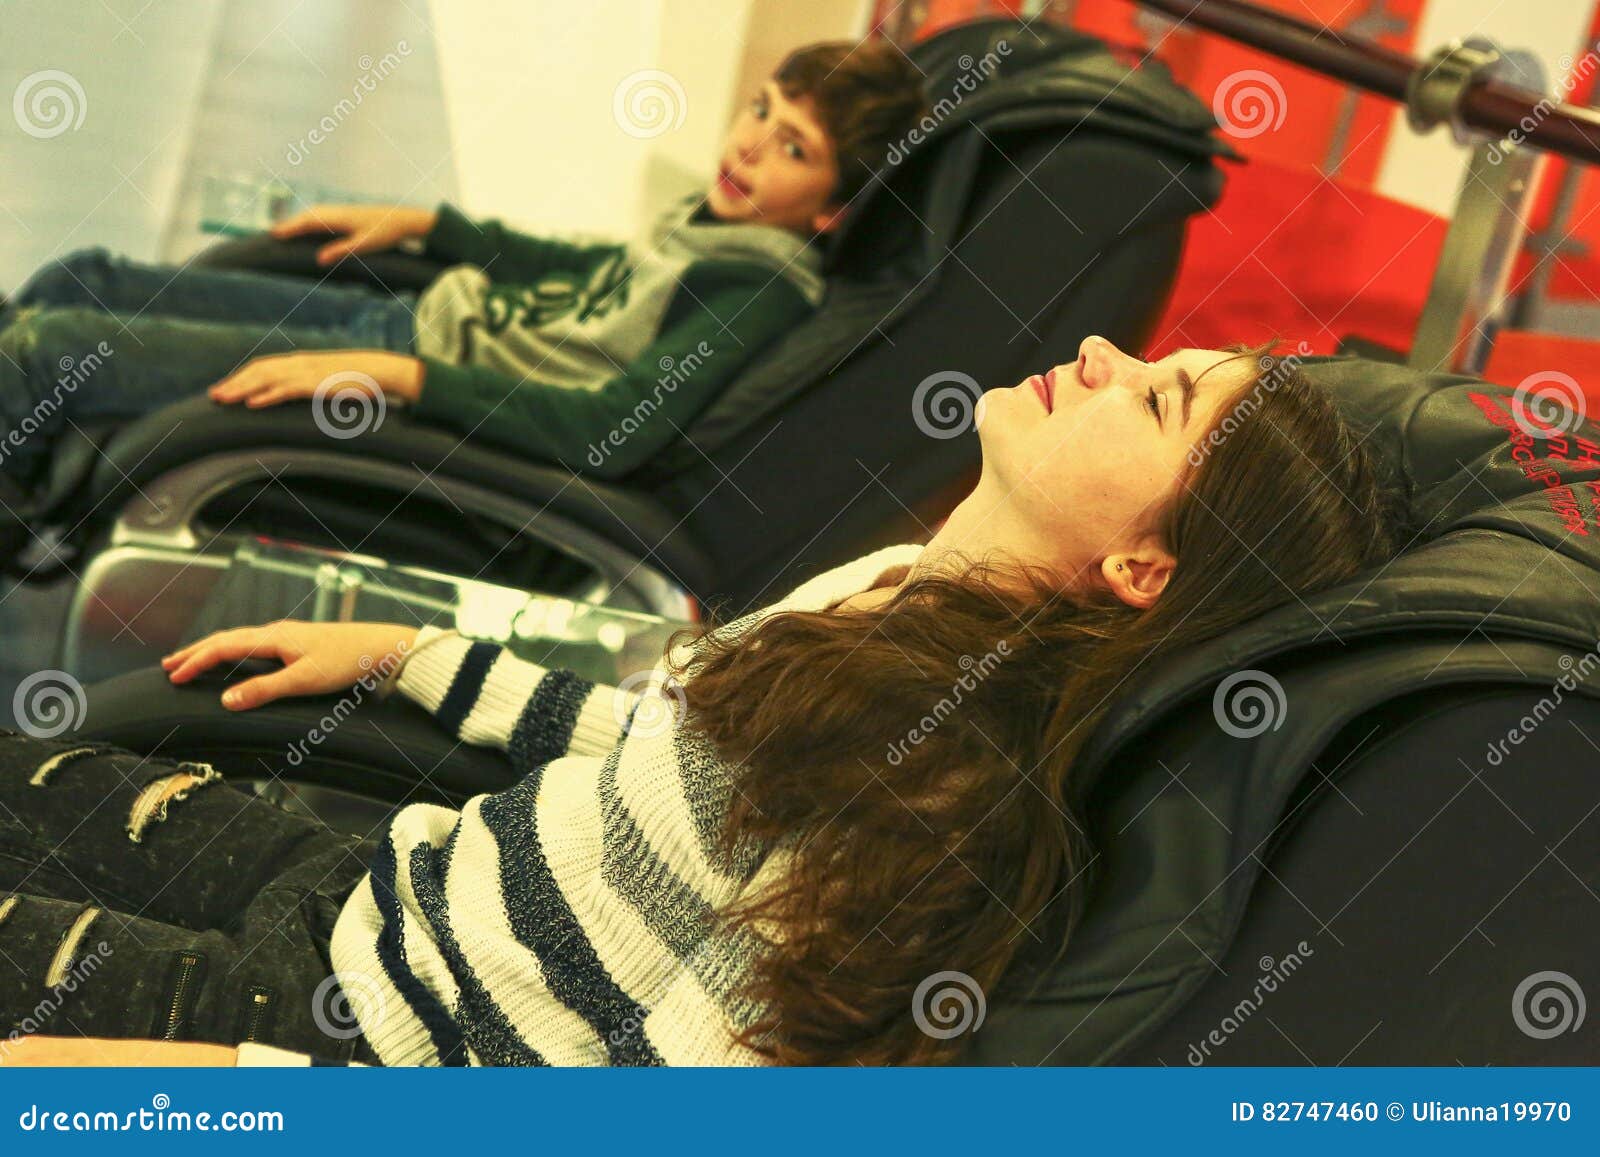 Teen Siblings Brother And Sister In Massage Chair Stock